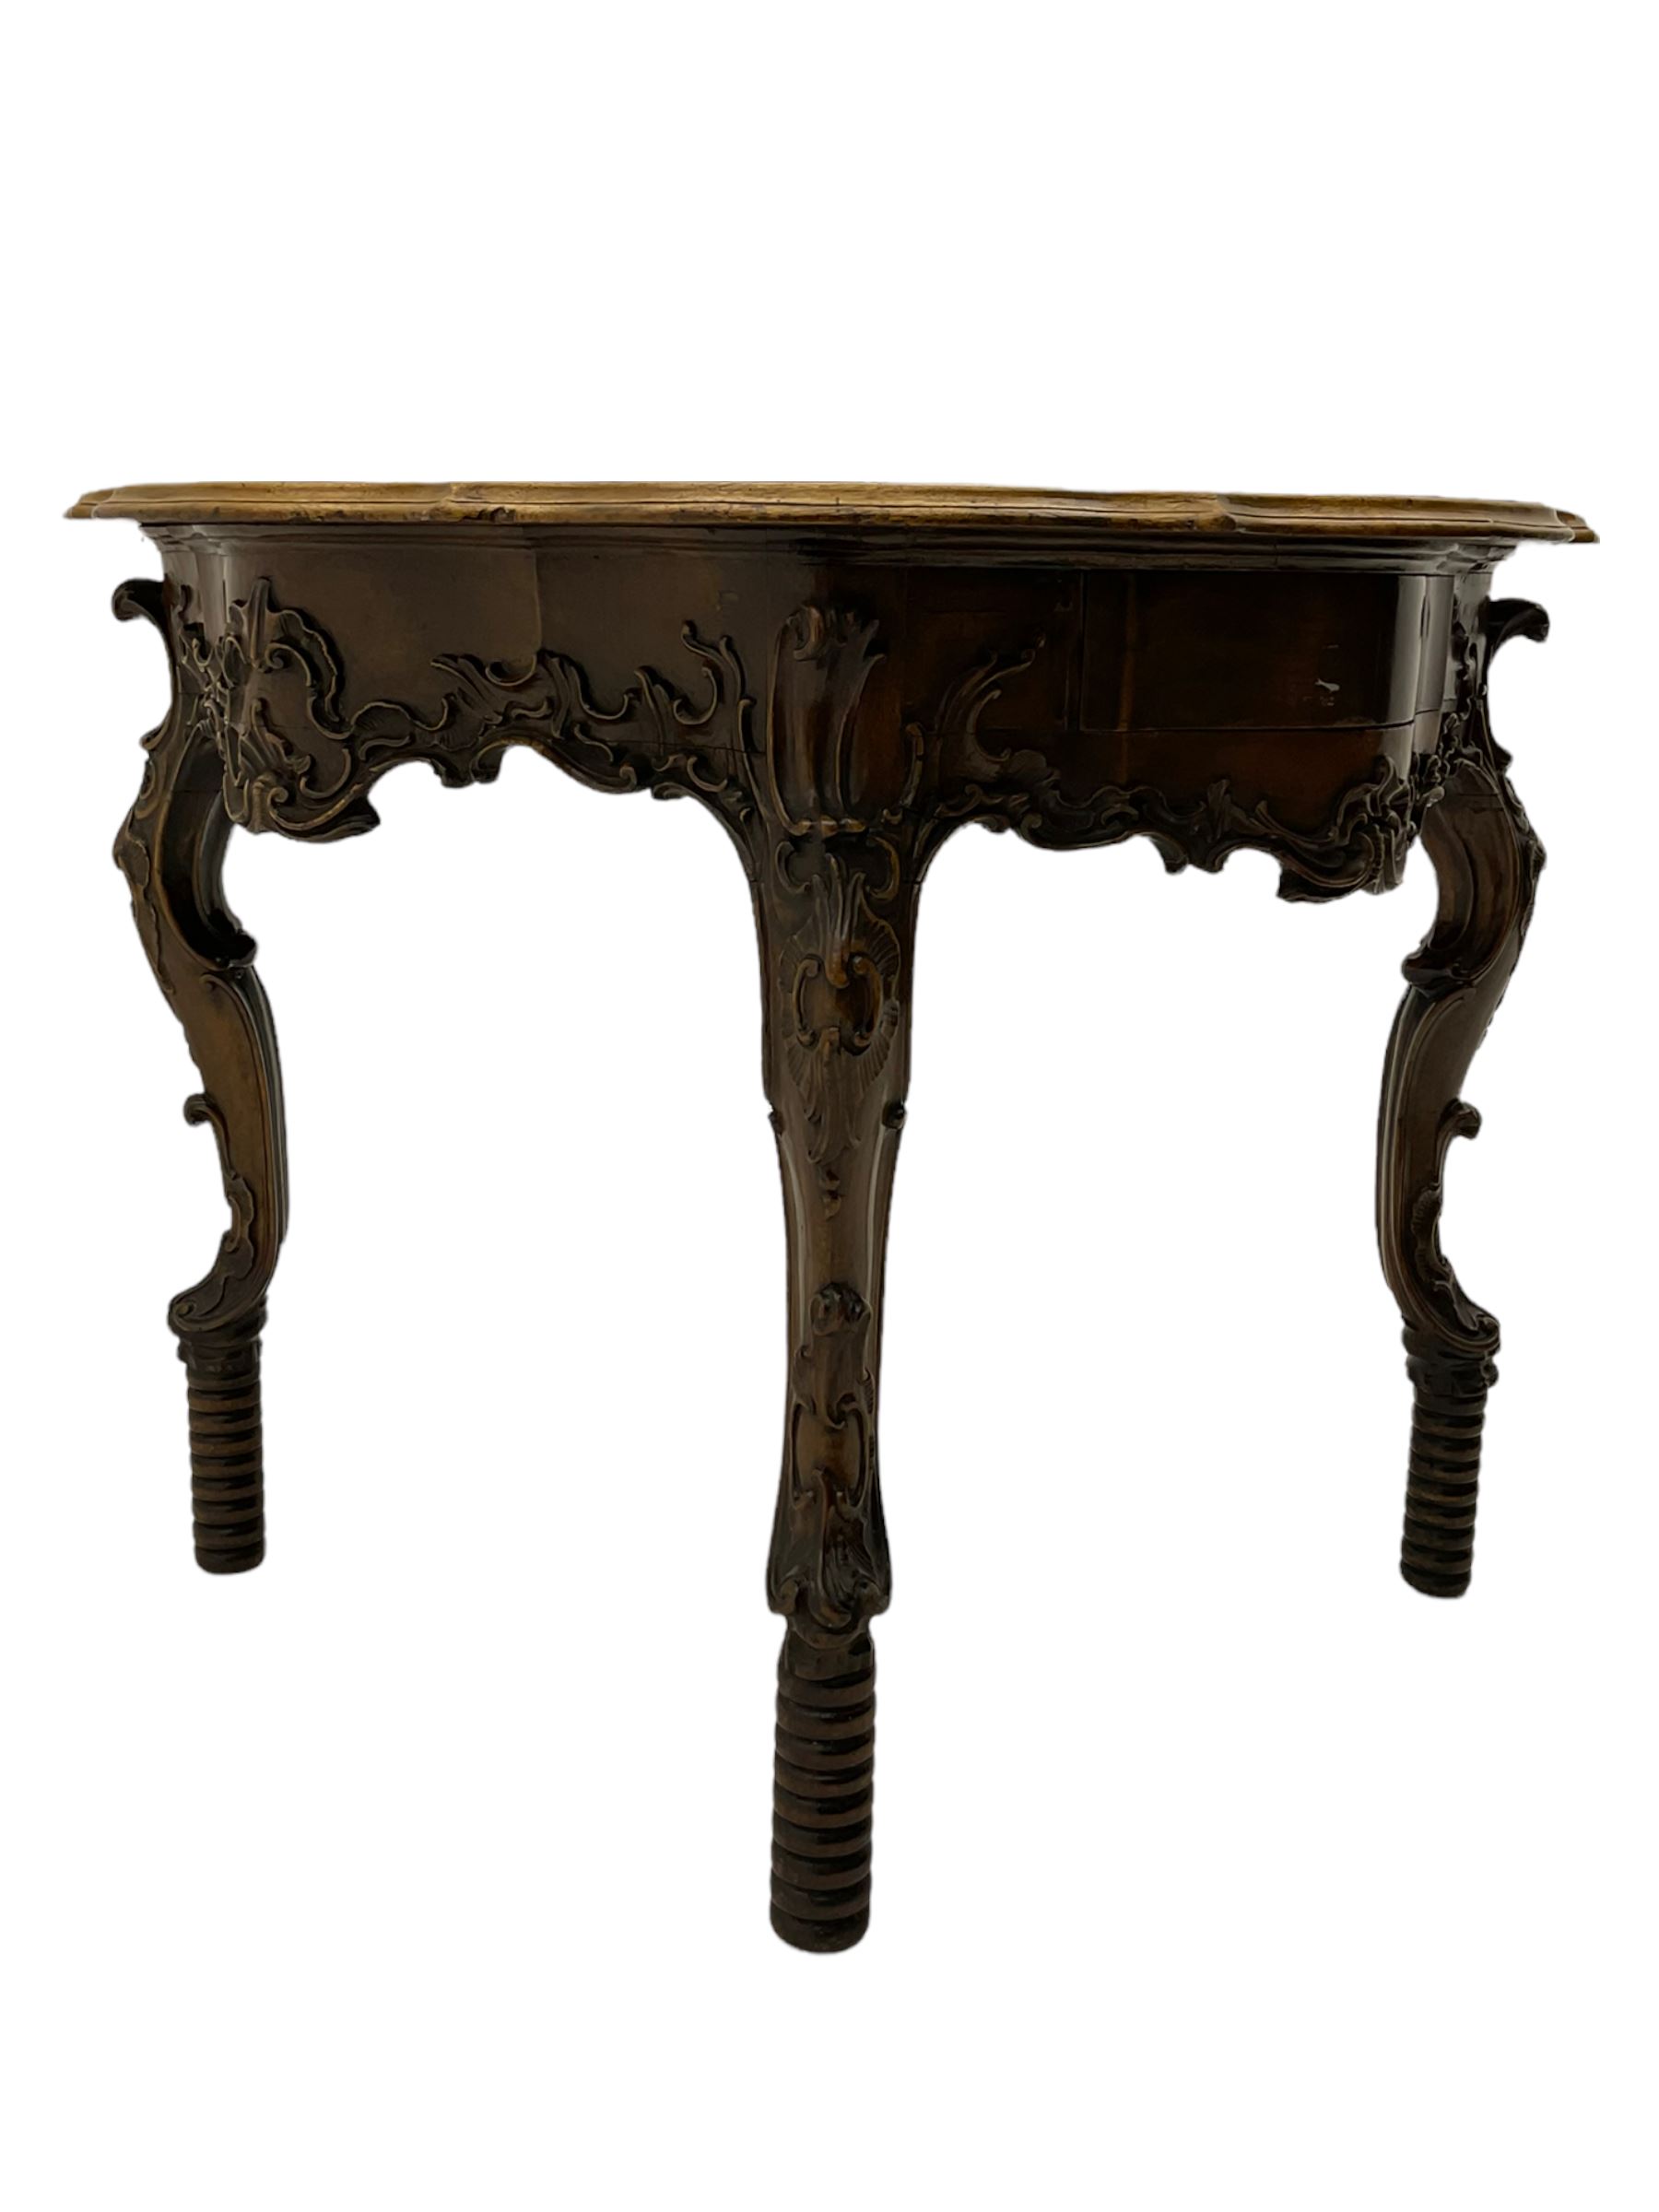 19th century walnut centre table - Image 3 of 9